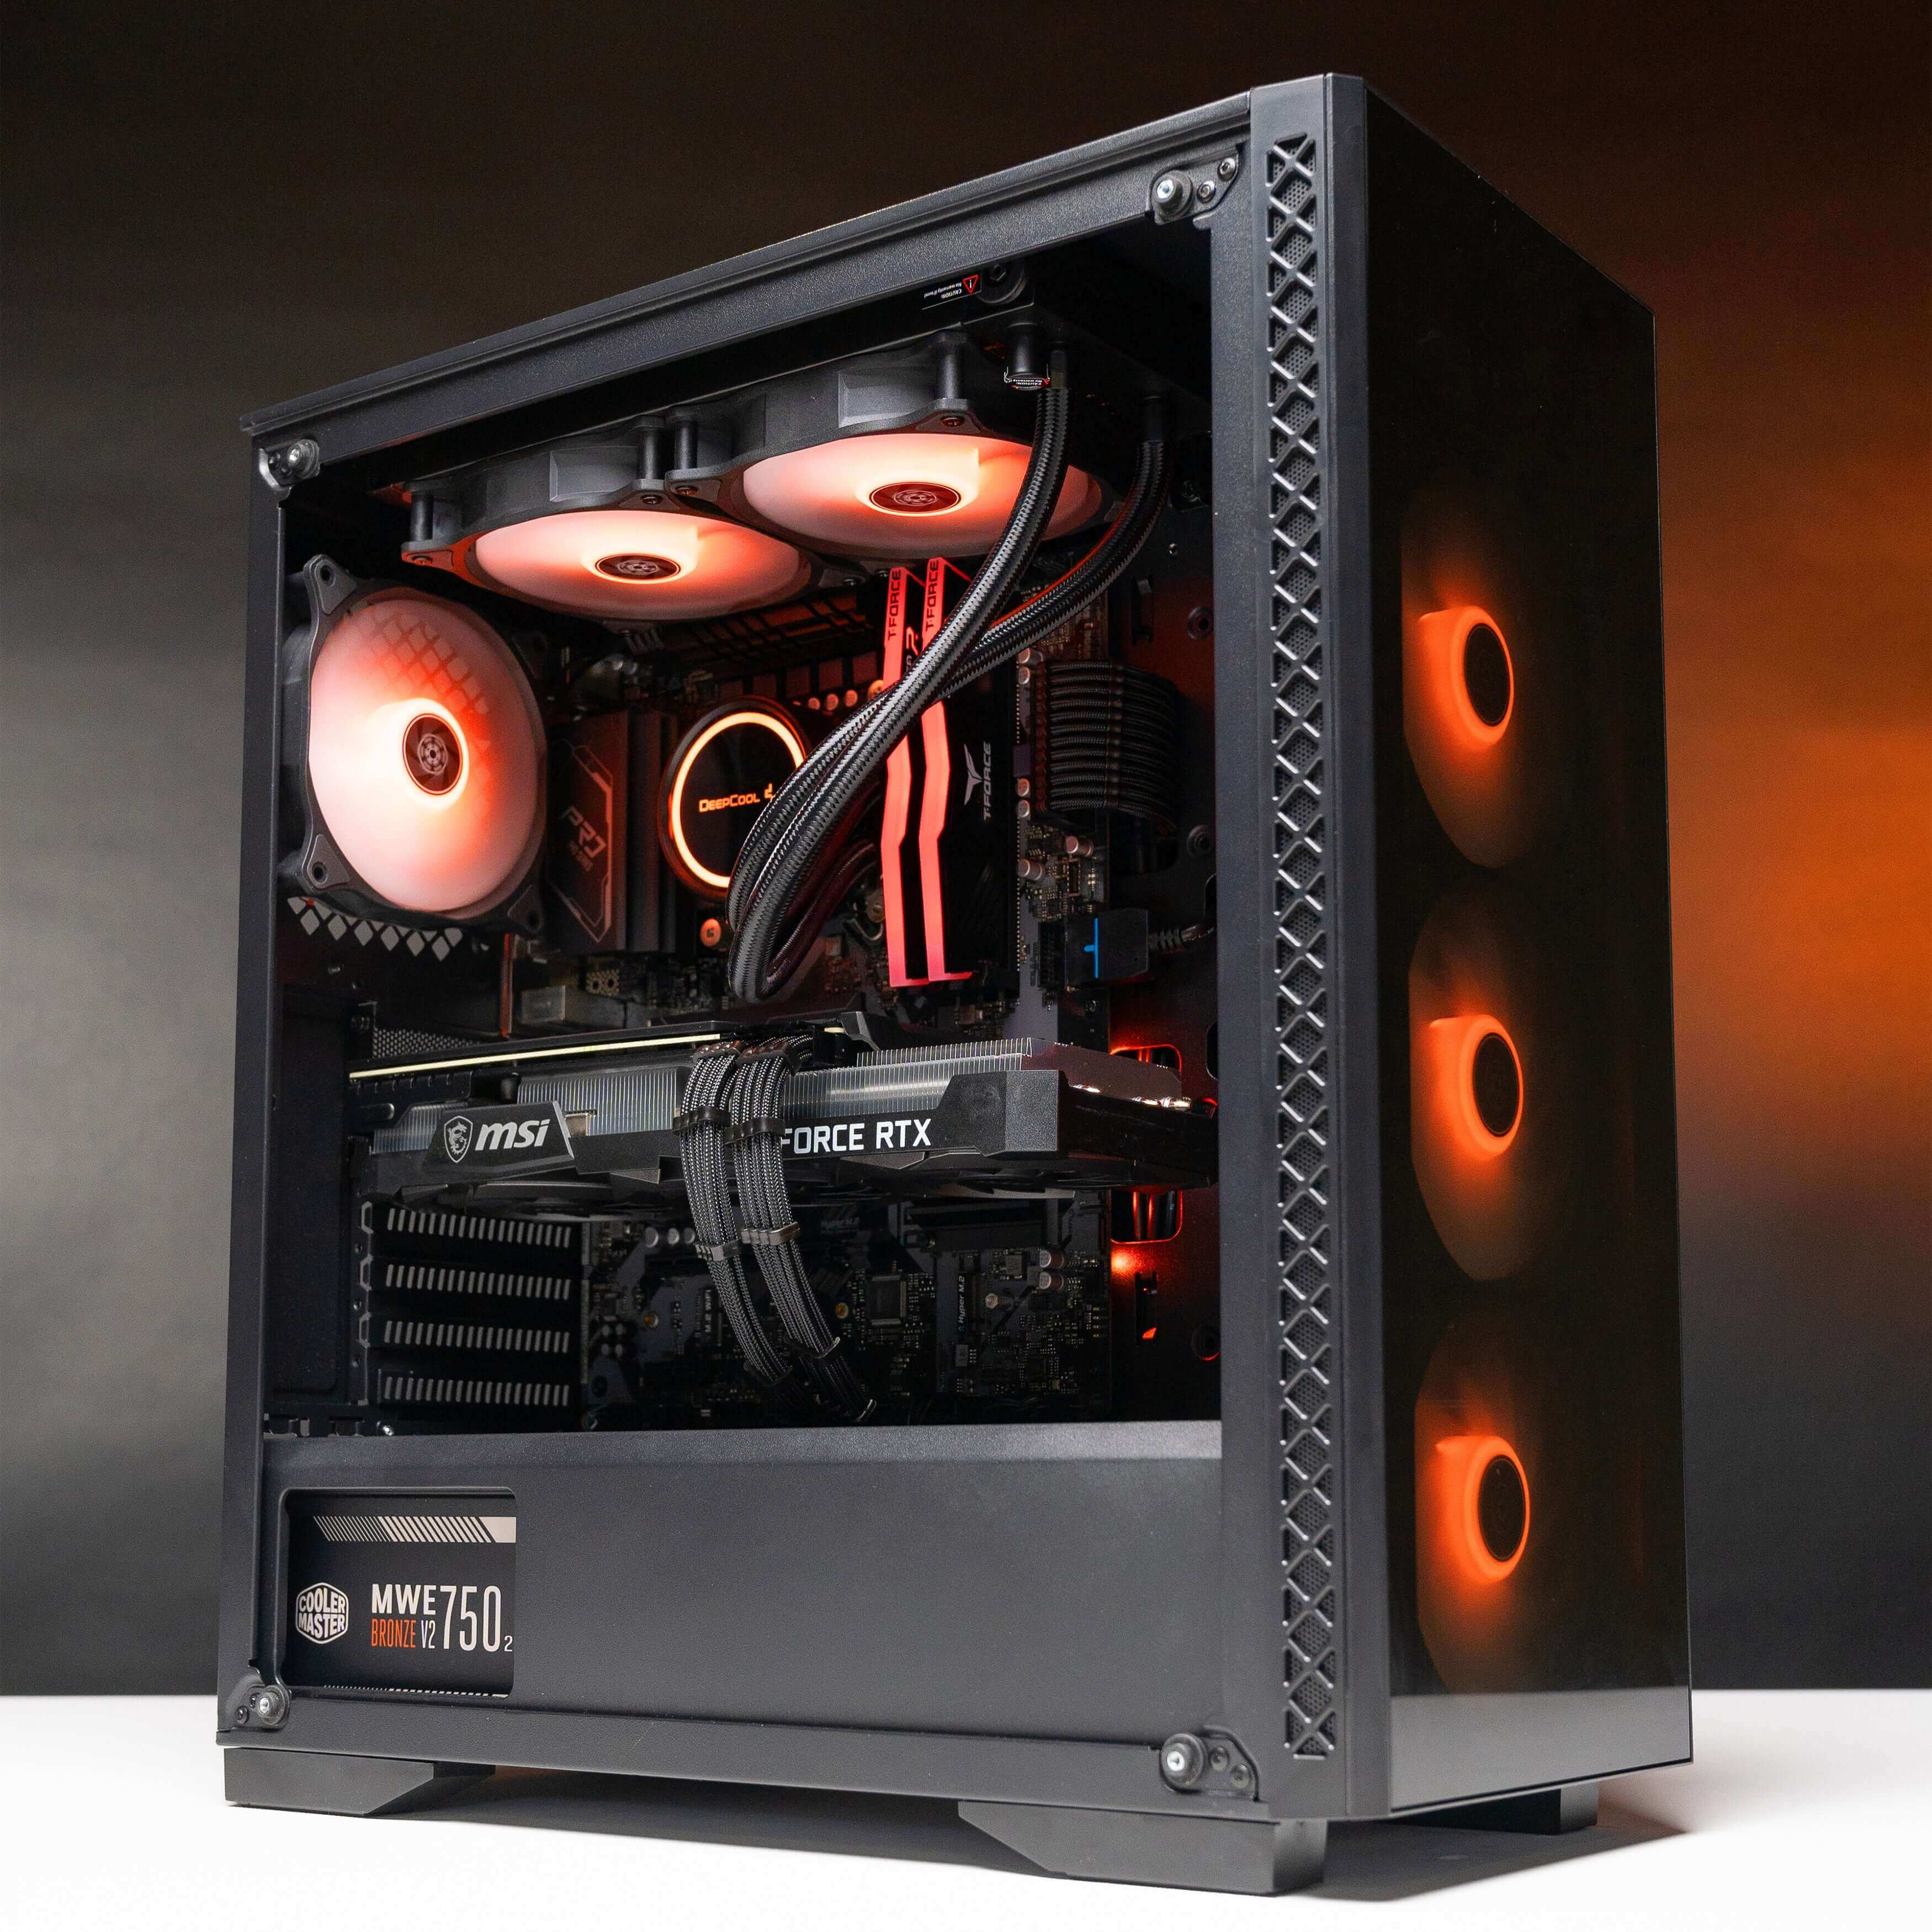 Intel Stock Cooler, FSP Hydro K PRO 700W 80+ Bronze power supply, and DarkFlash DR-12 fans x 6 in the OMEN: LVL 8 EOFY SALE Gaming PC